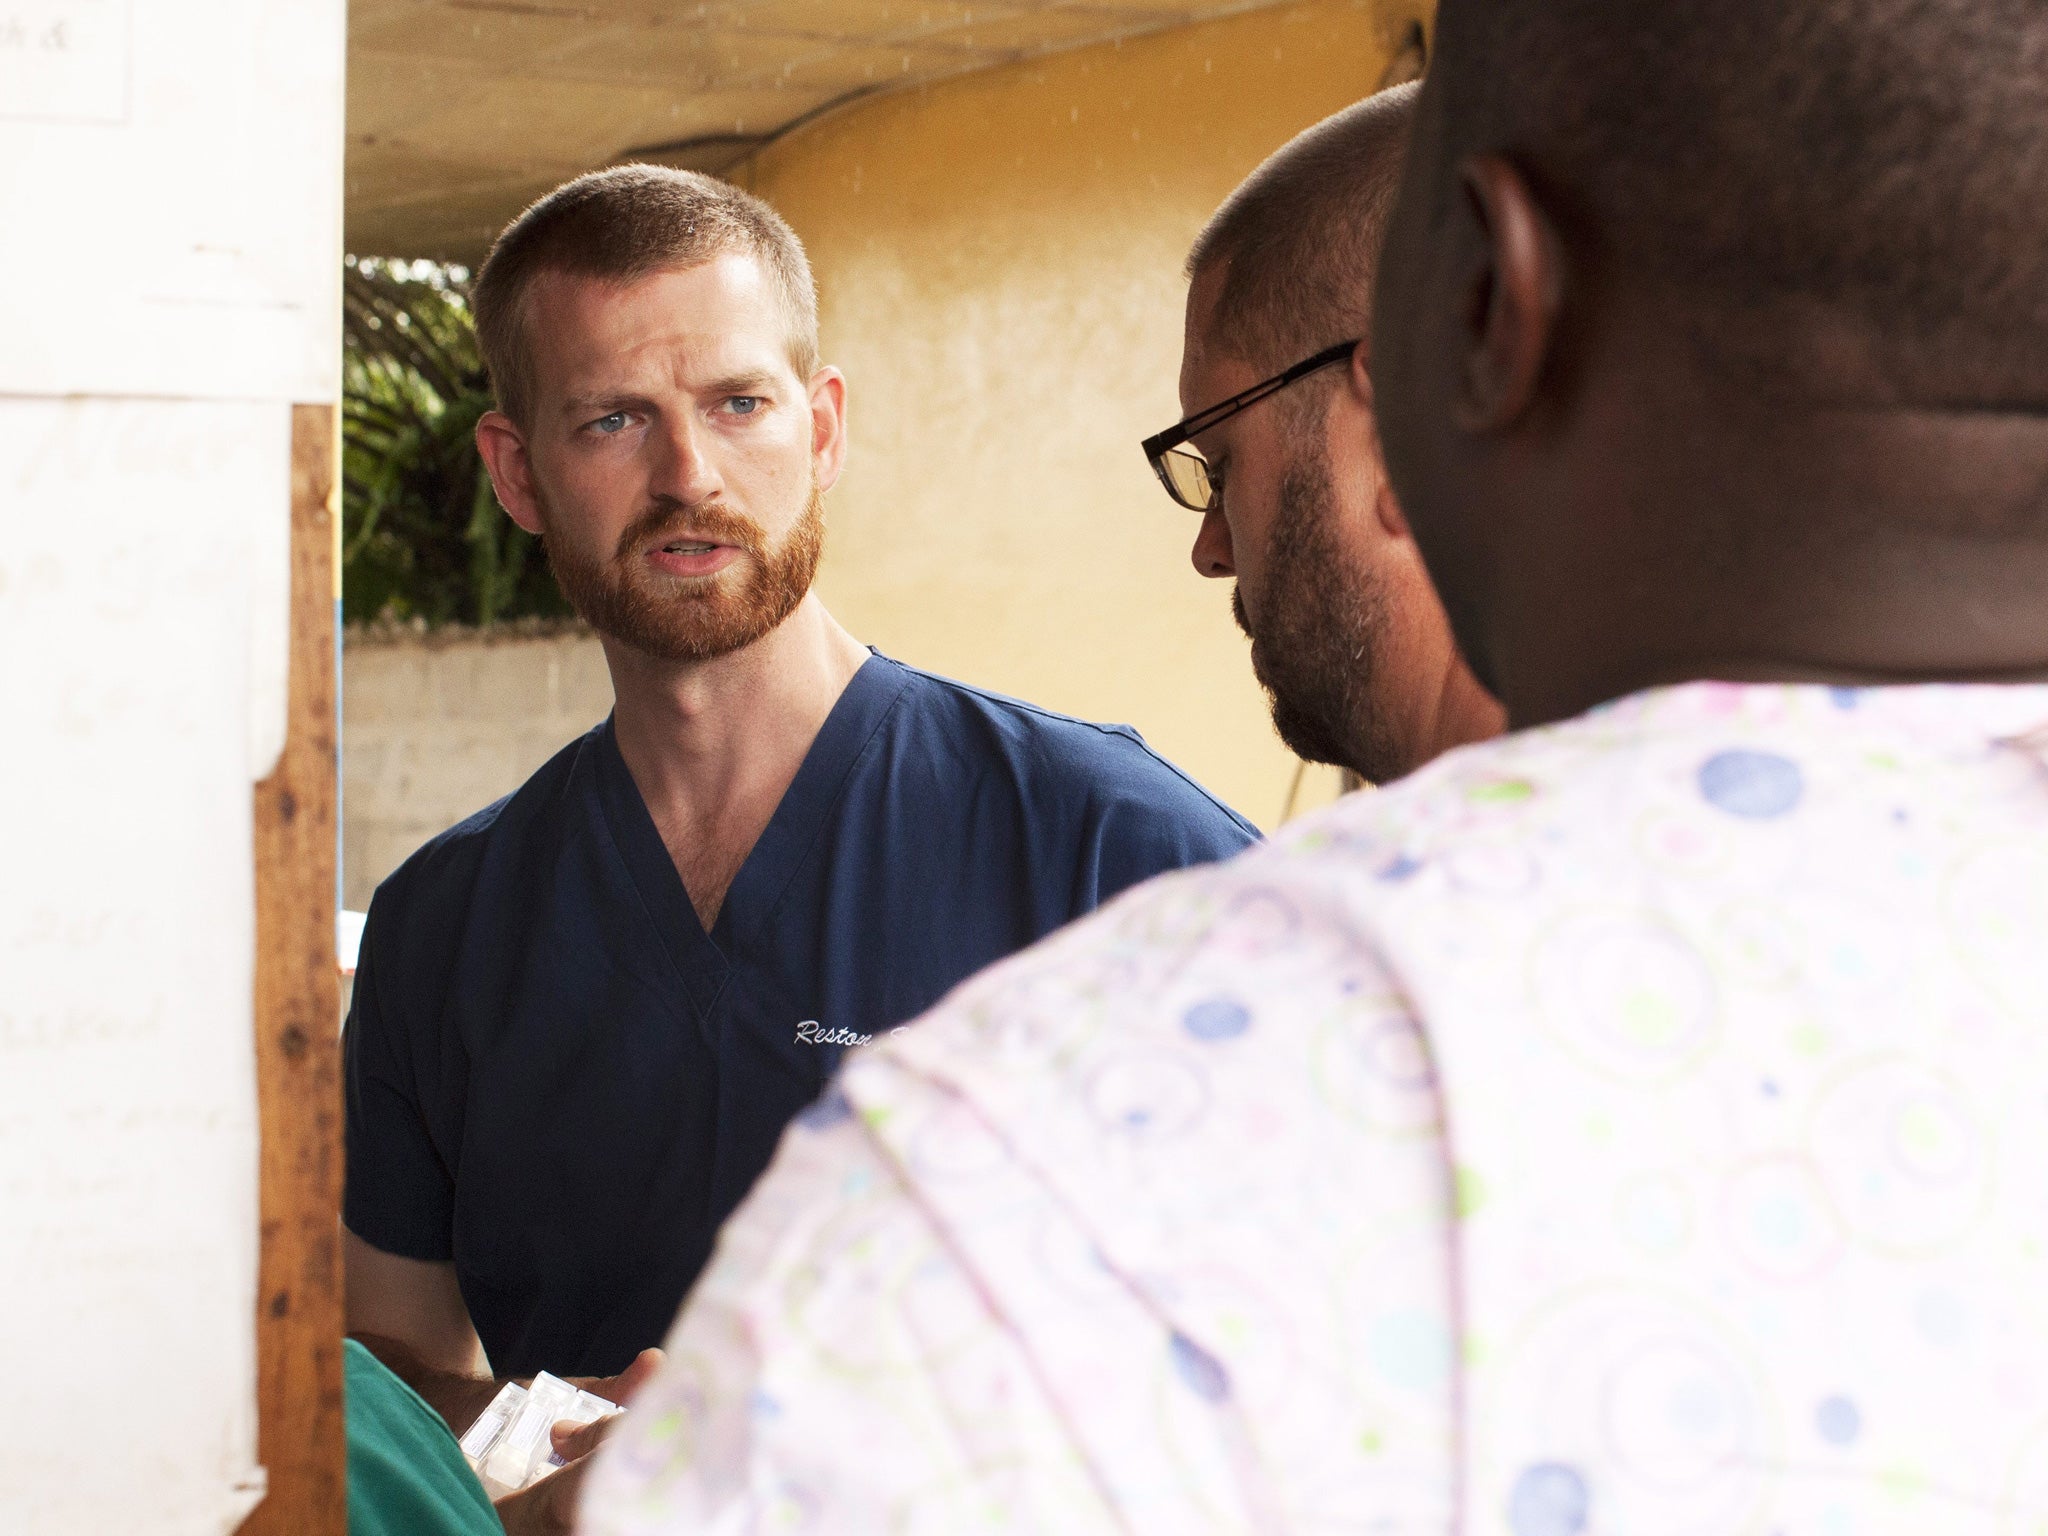 Dr Kent Brantly, pictured while working at an Ebola treatment clinic in Foya, Liberia, on 23 June 2014